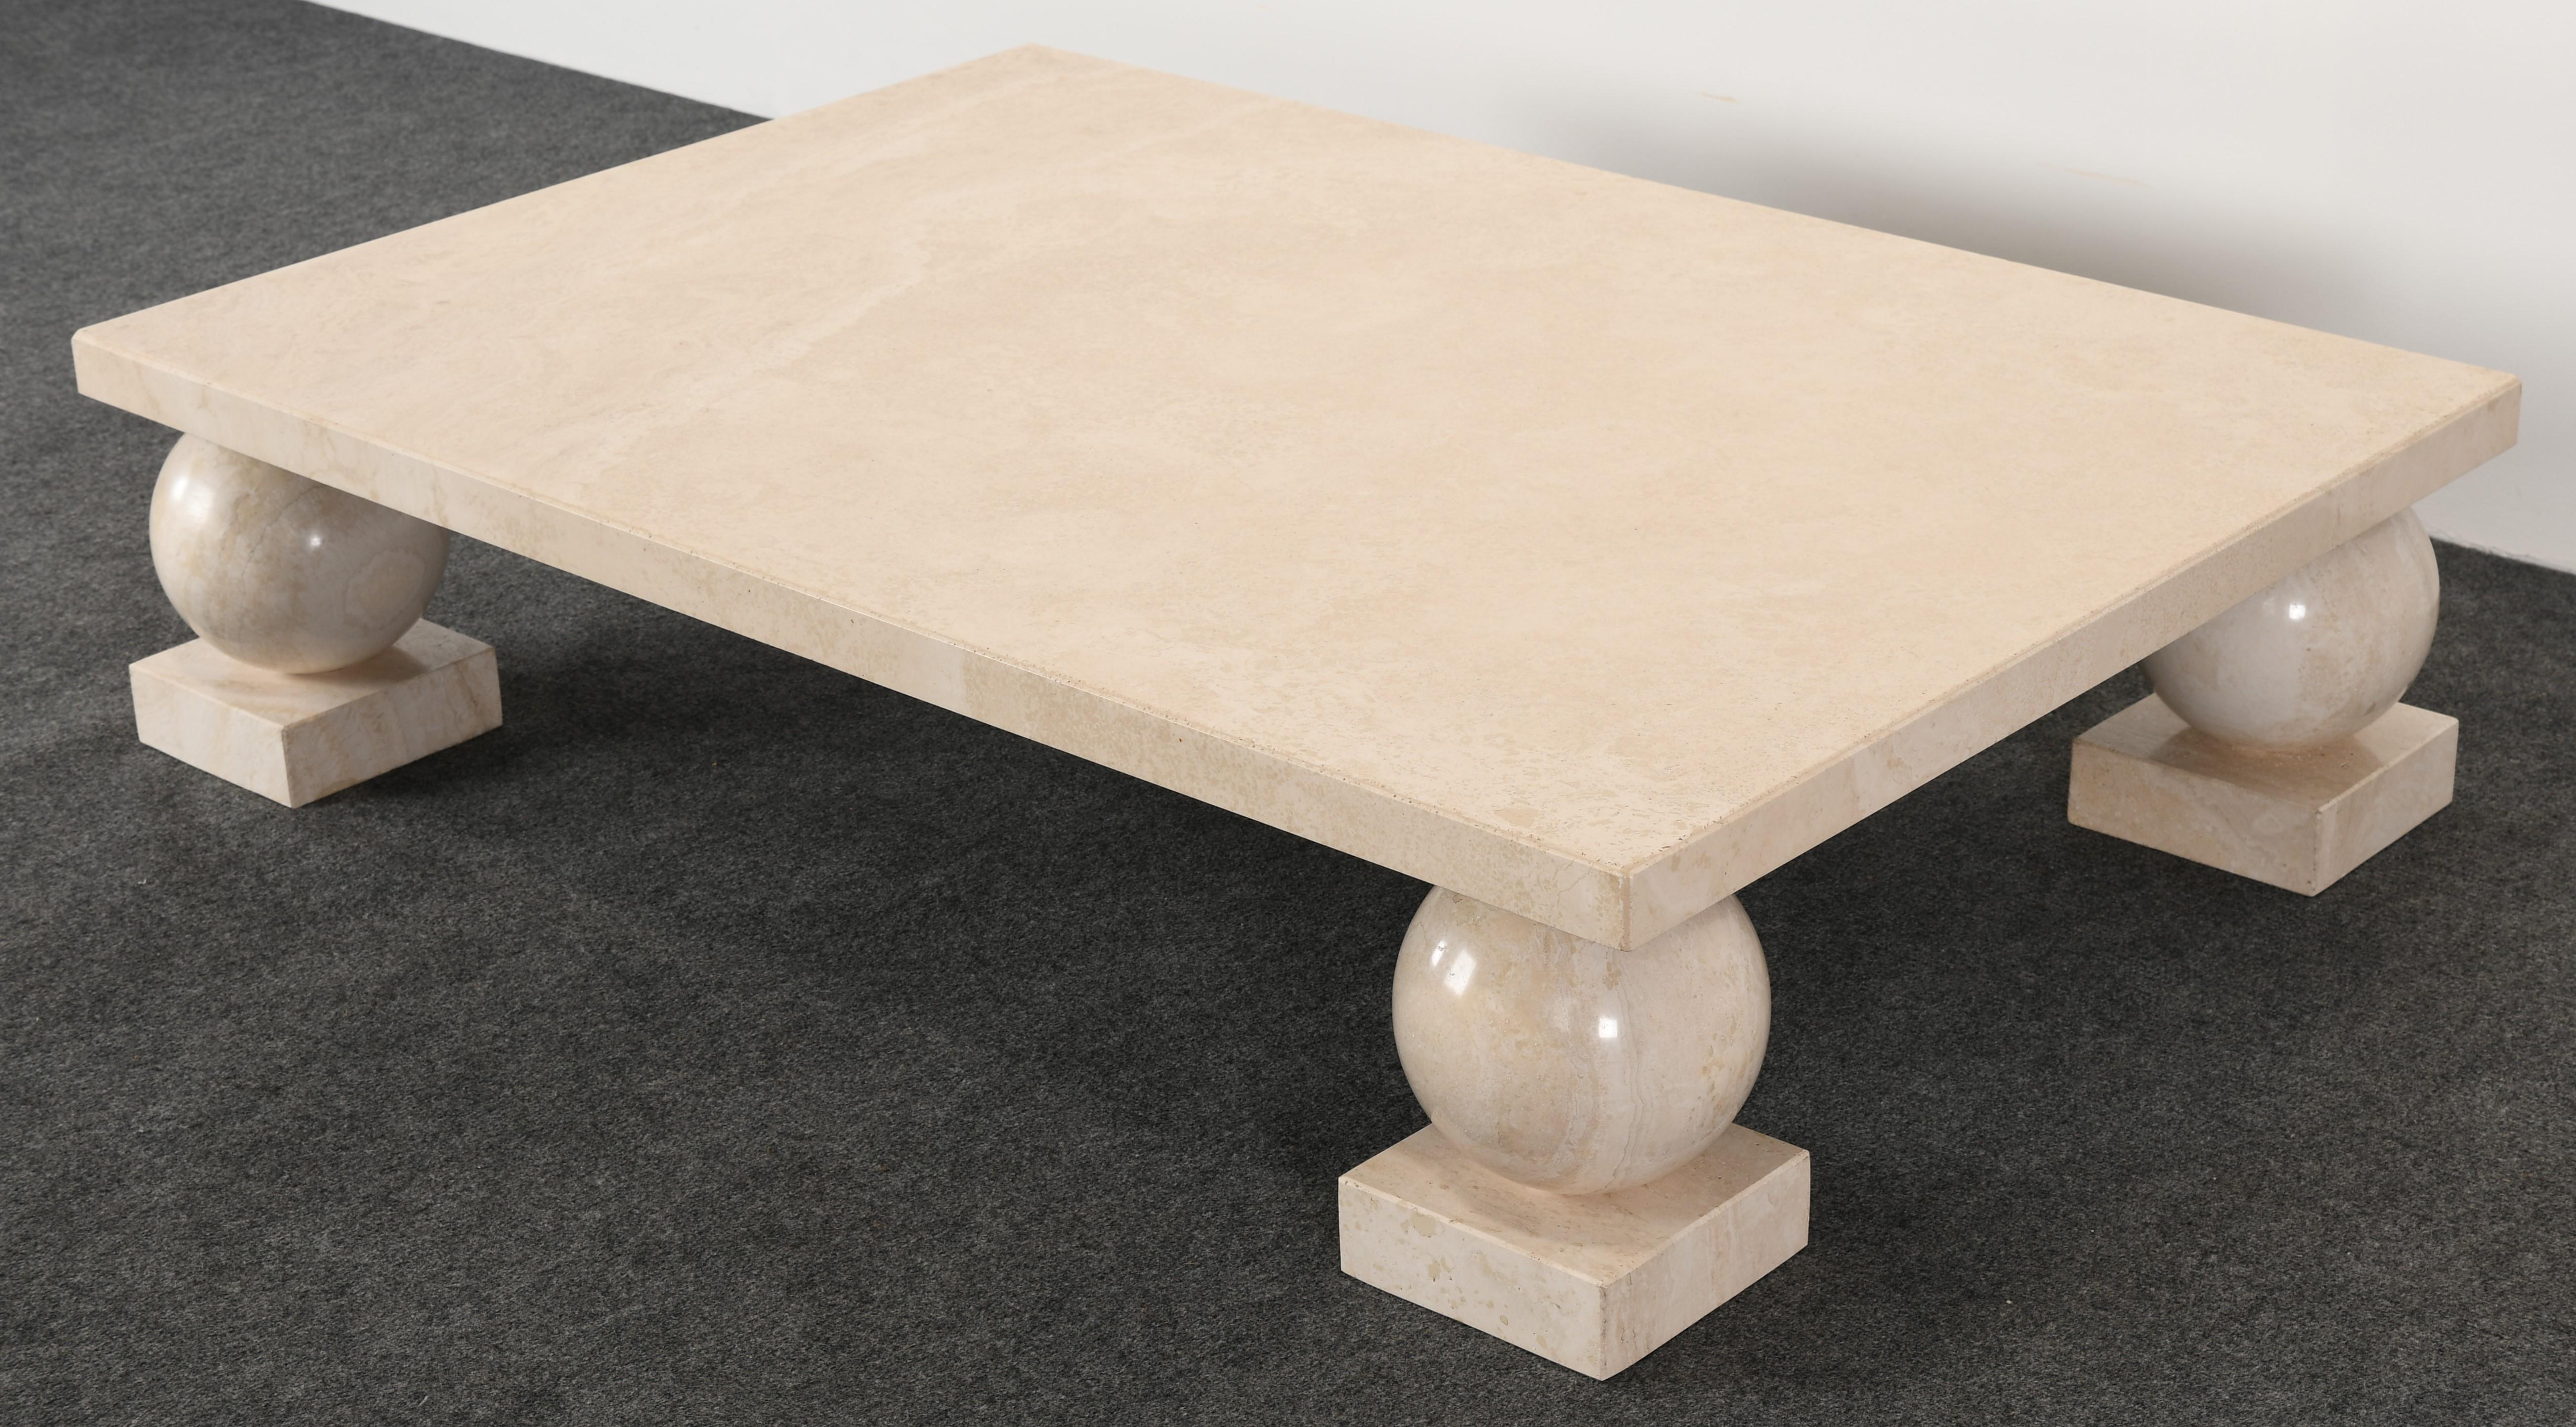 A classical Roche Bobois or Massimo and Lella Vignelli style travertine marble coffee table. This Minimalist cocktail table or coffee table is mounted on four round legs. This table is structurally sound and in good condition.

Dimensions: 12